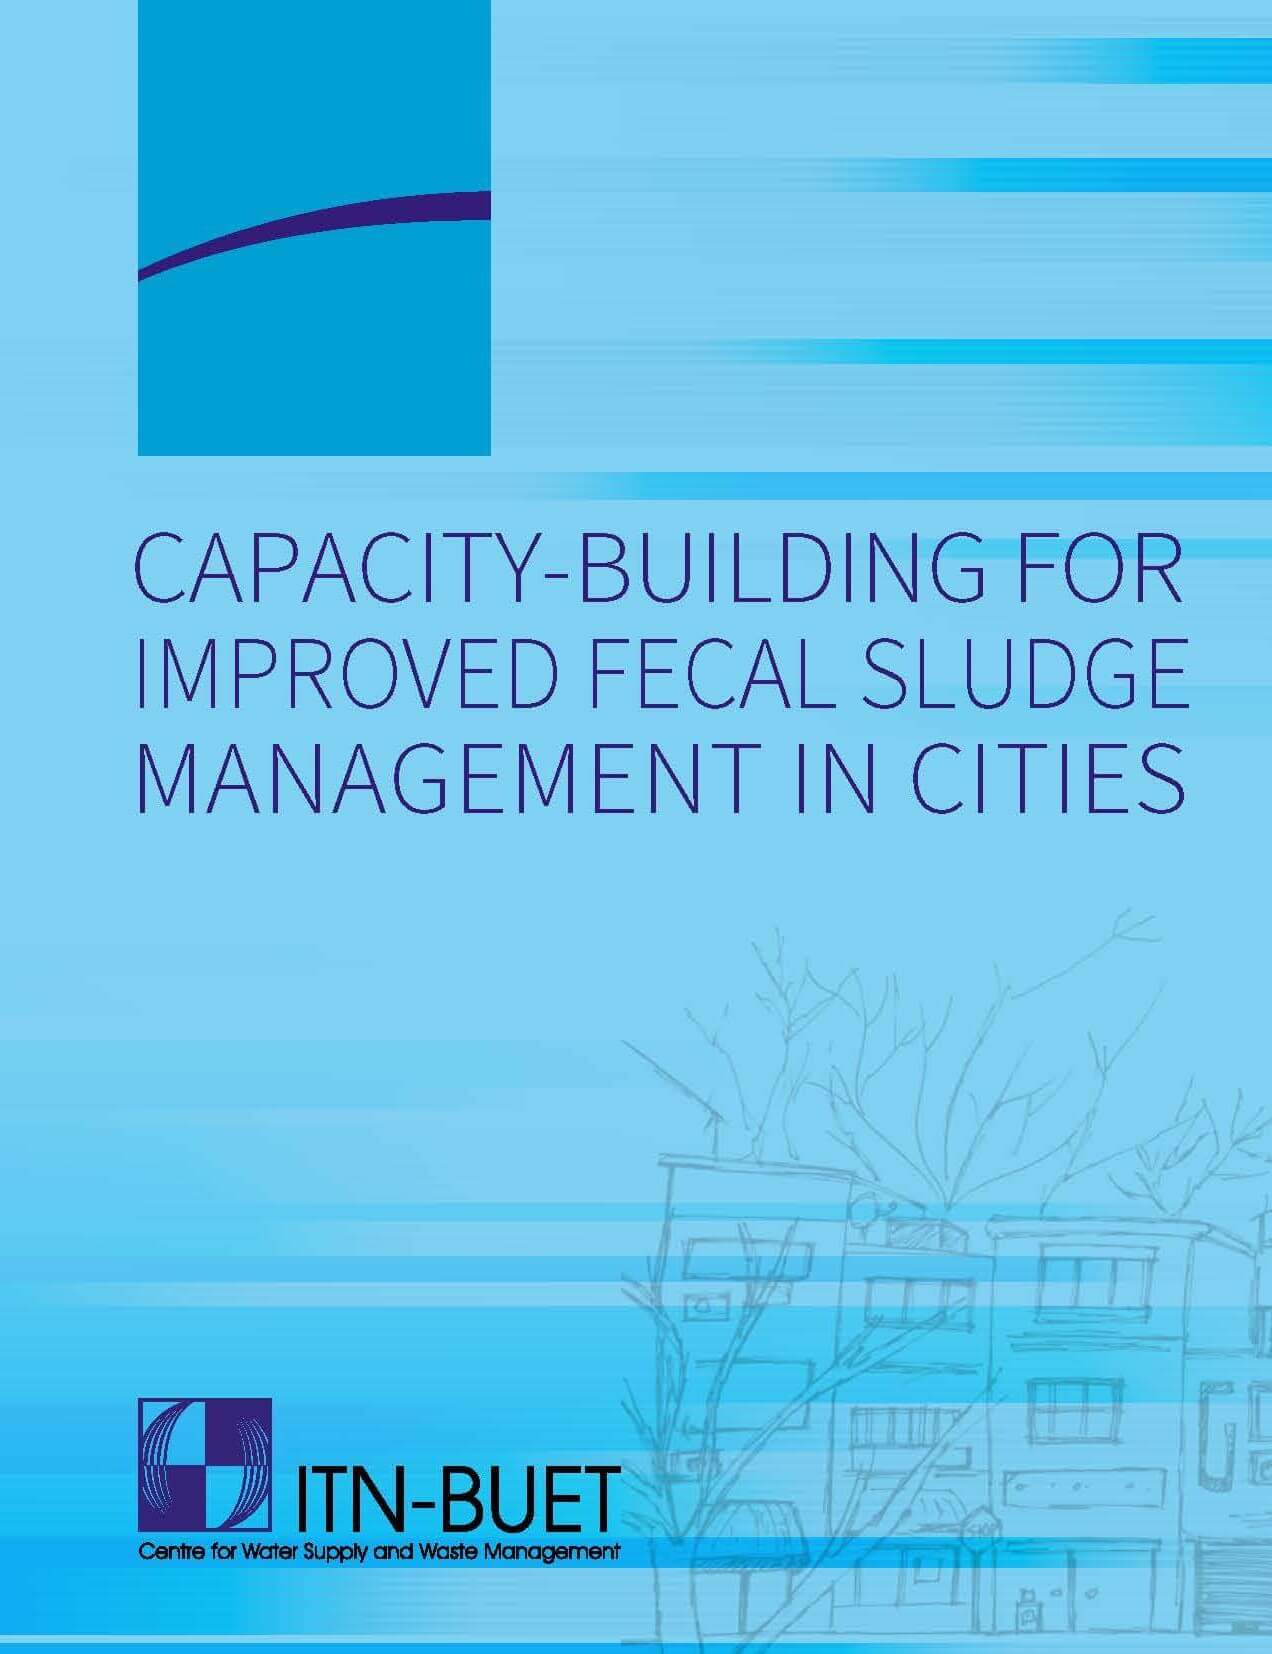 Capacity-building for Improved Fecal Sludge Management in Cities